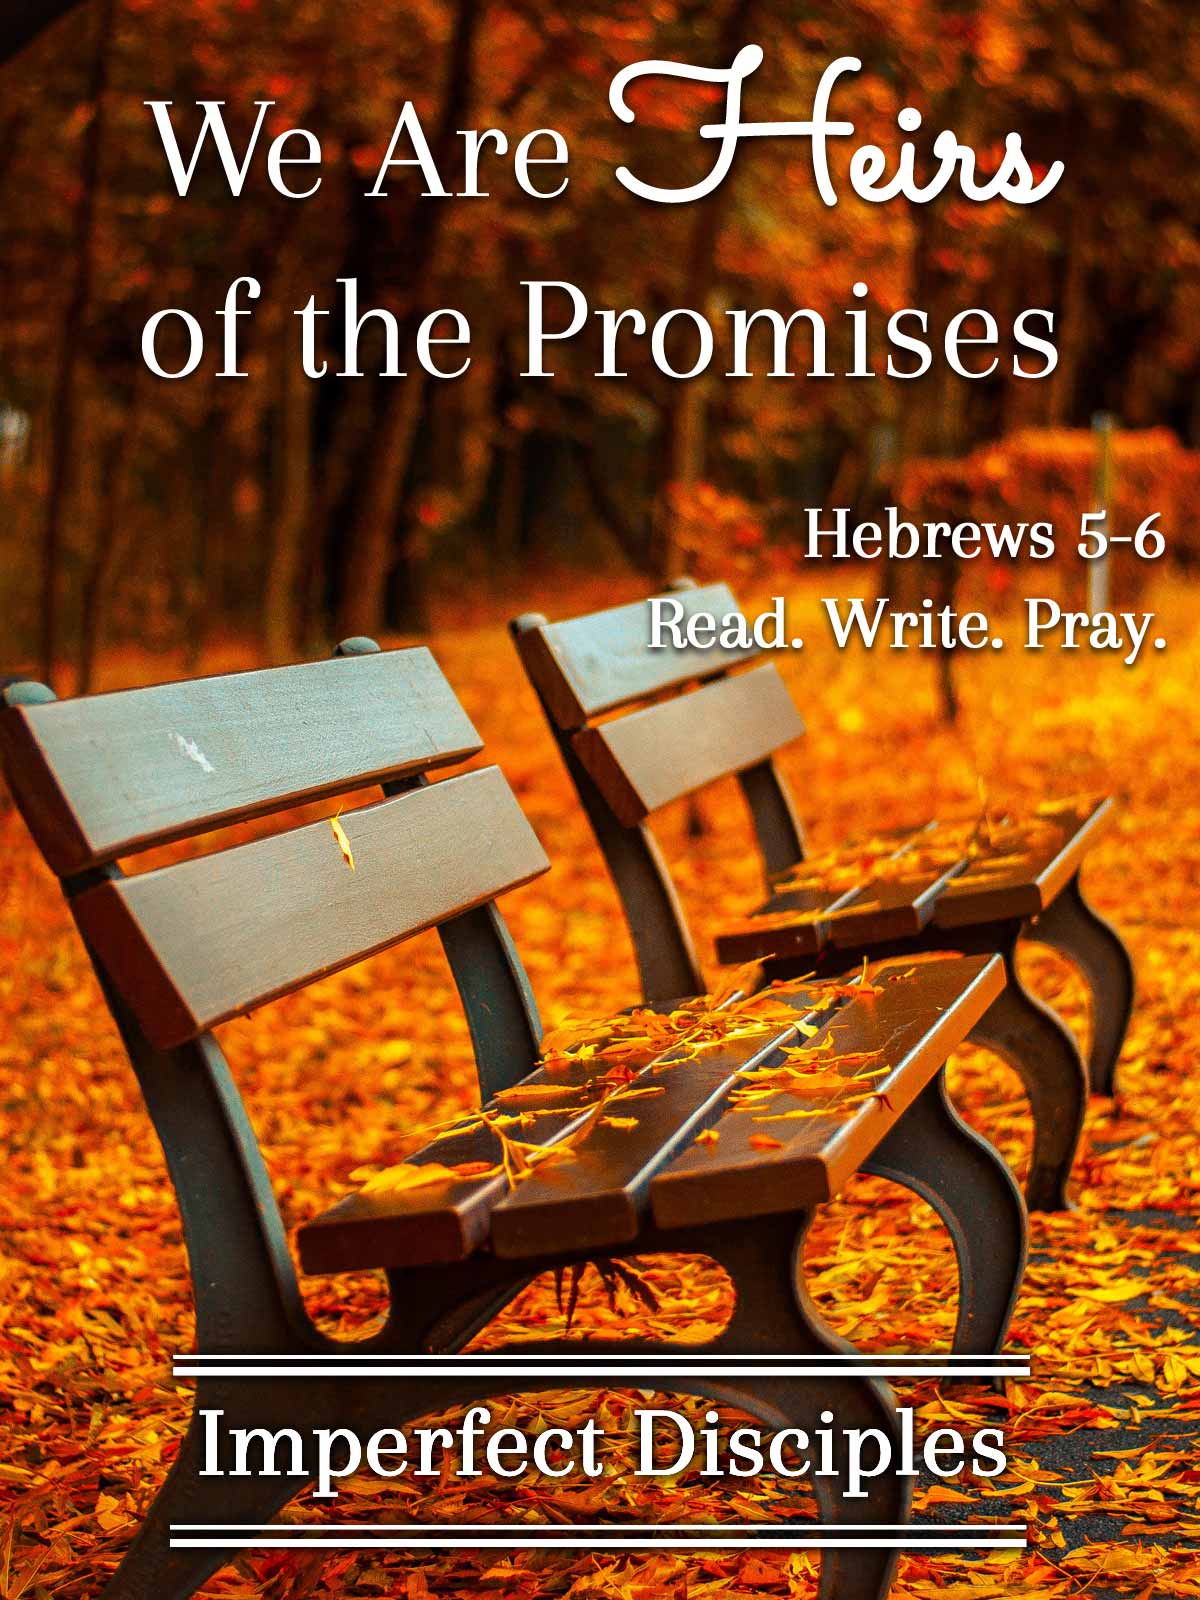 We Are Heirs of His Promises - Hebrews 5-6 - Read. Write. Pray.